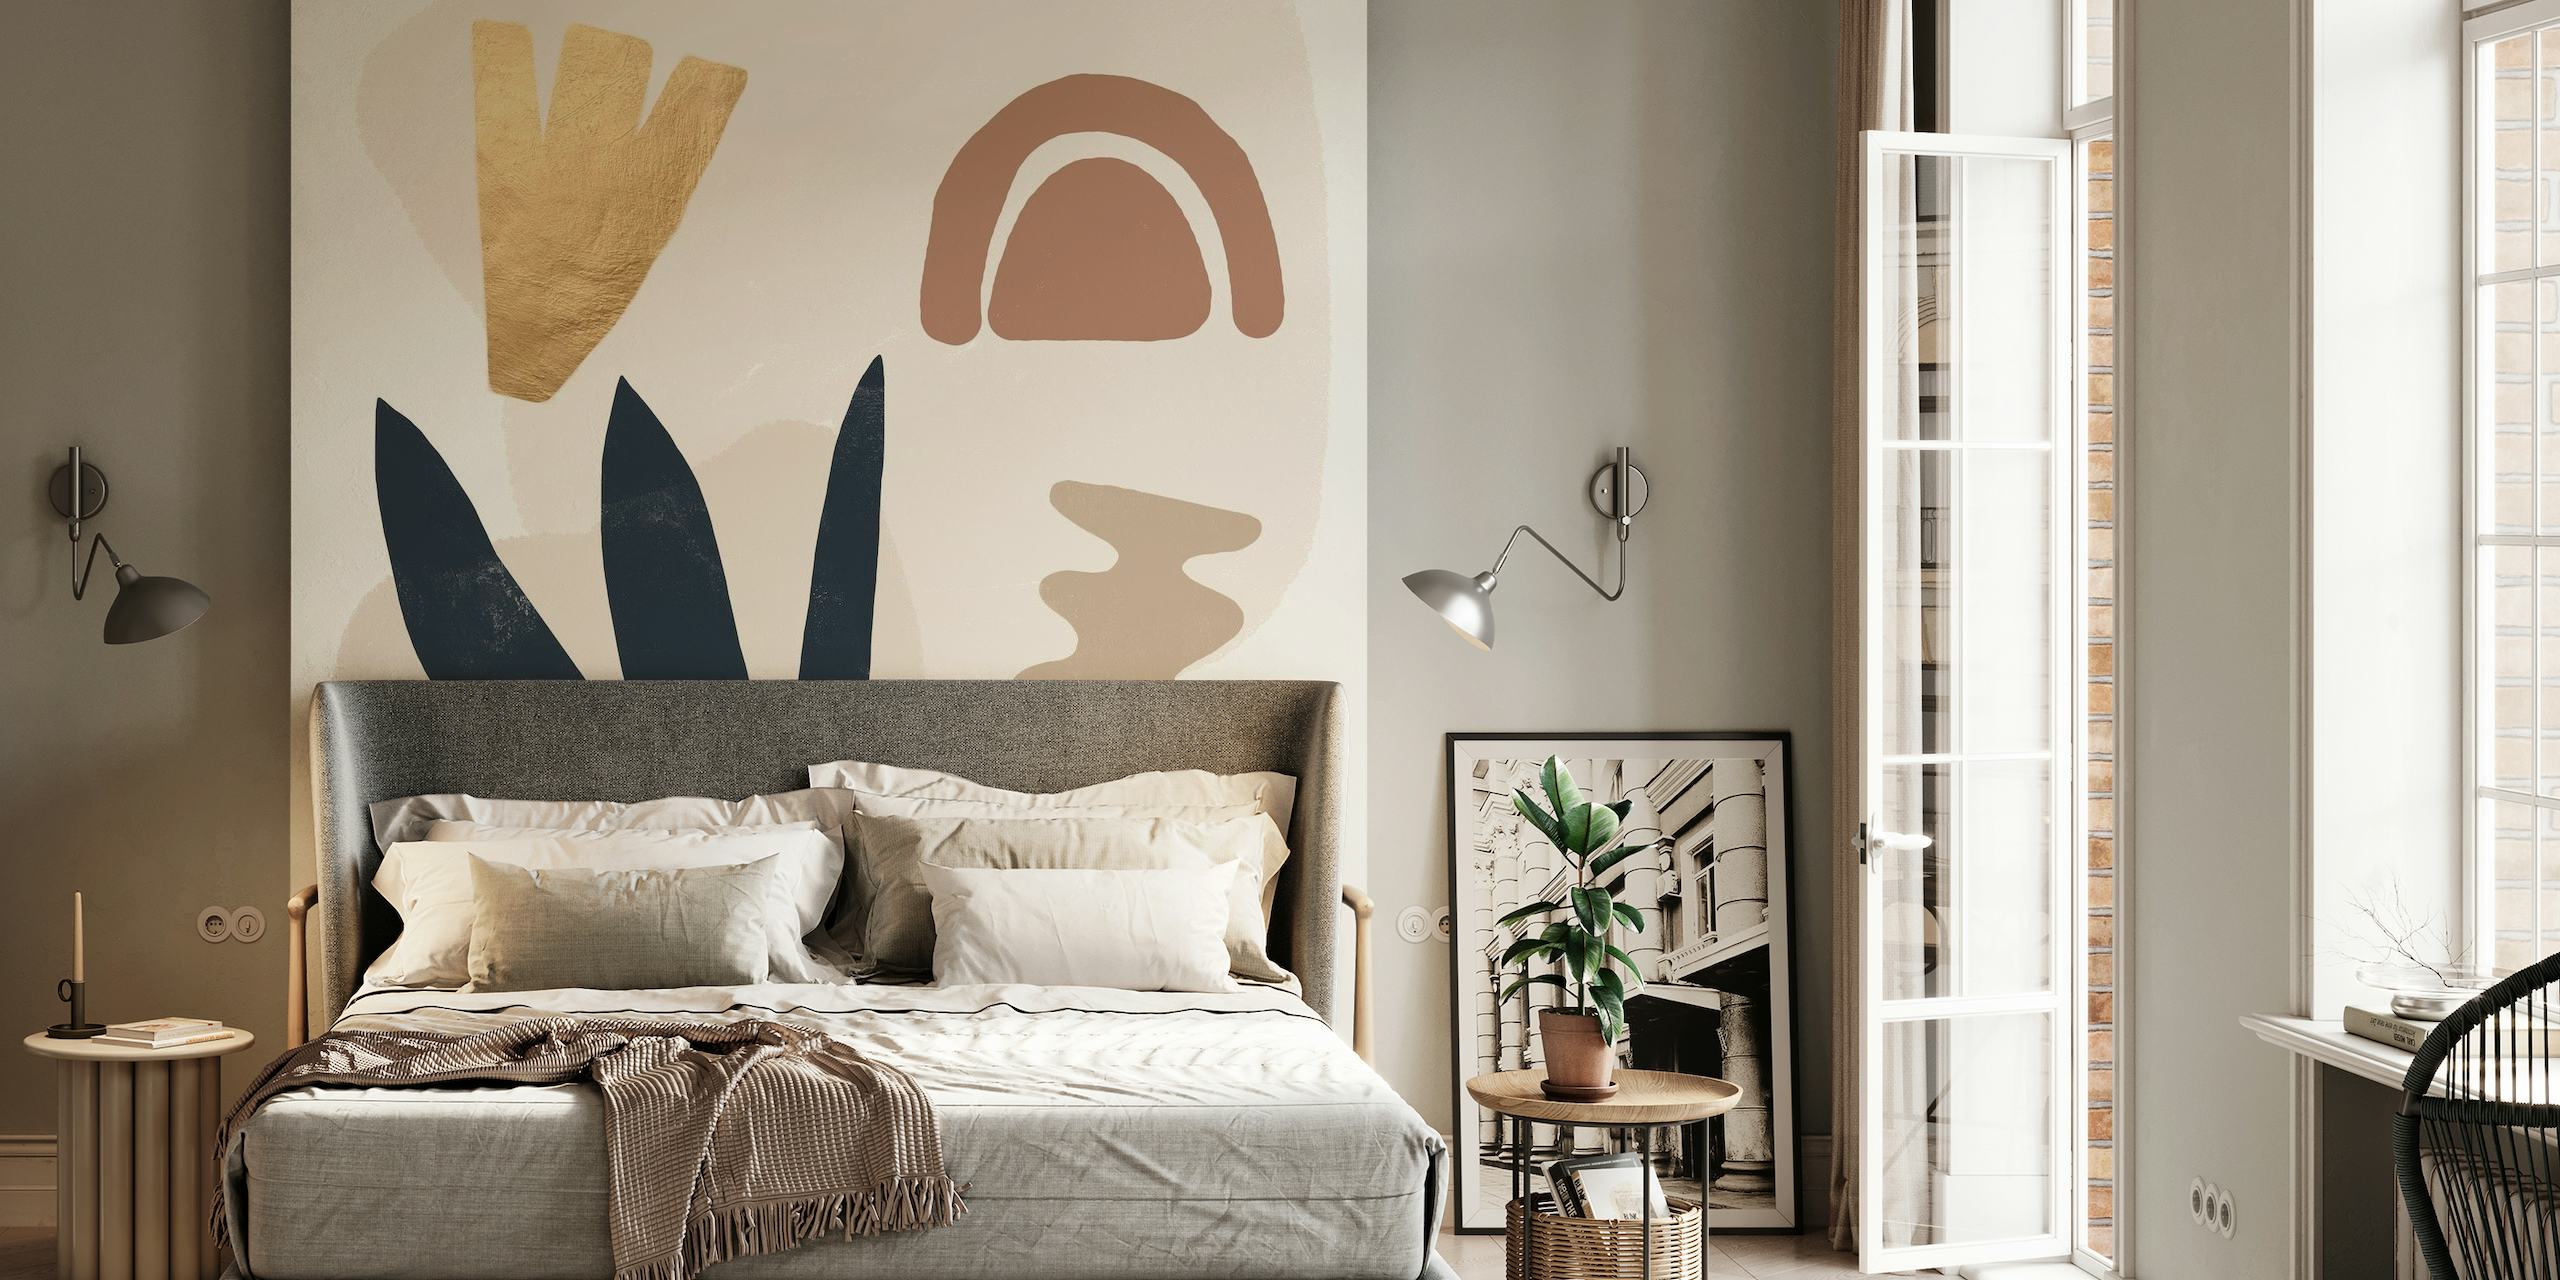 Abstract SHE Sand 2 wall mural with earthy tones and organic shapes